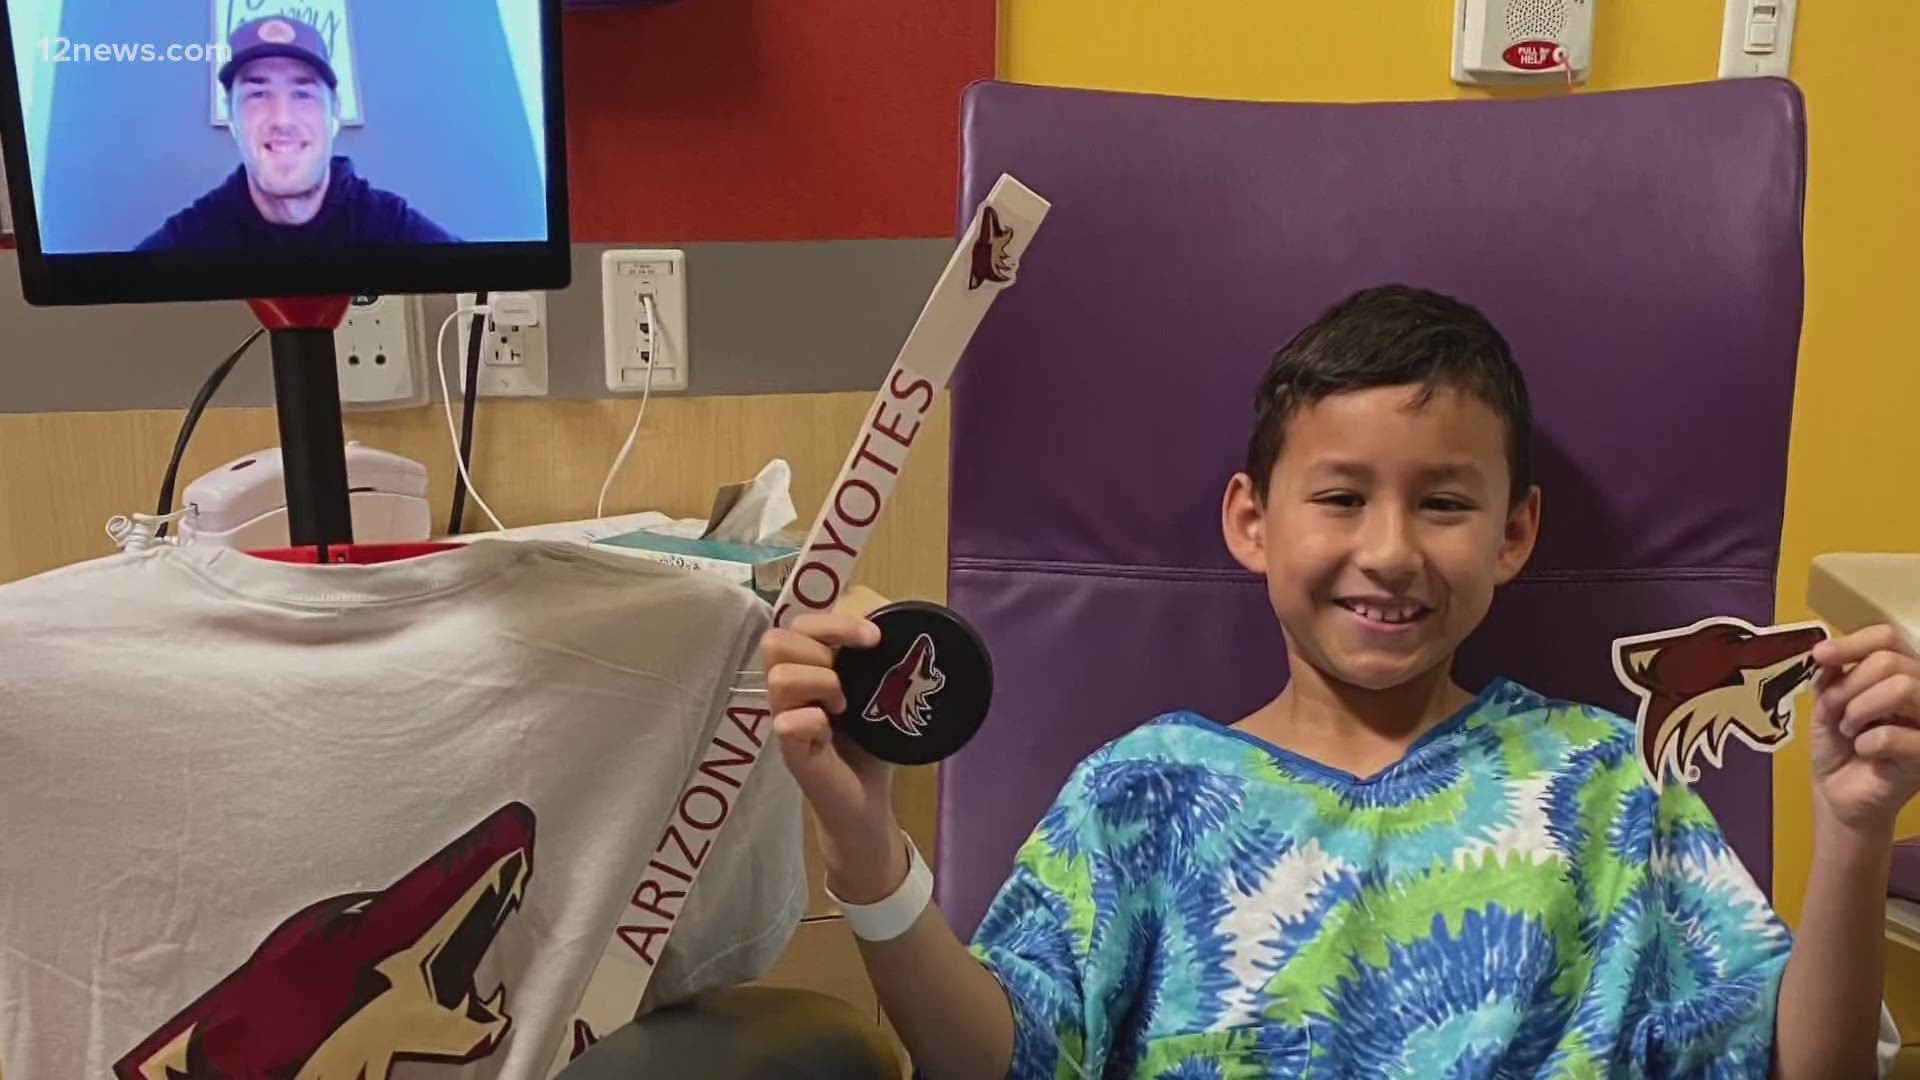 Phoenix Children's Hospital teamed up with local sports teams for creative ways for players to visit the kids. Thanks to robots Coyote's players made it happened.